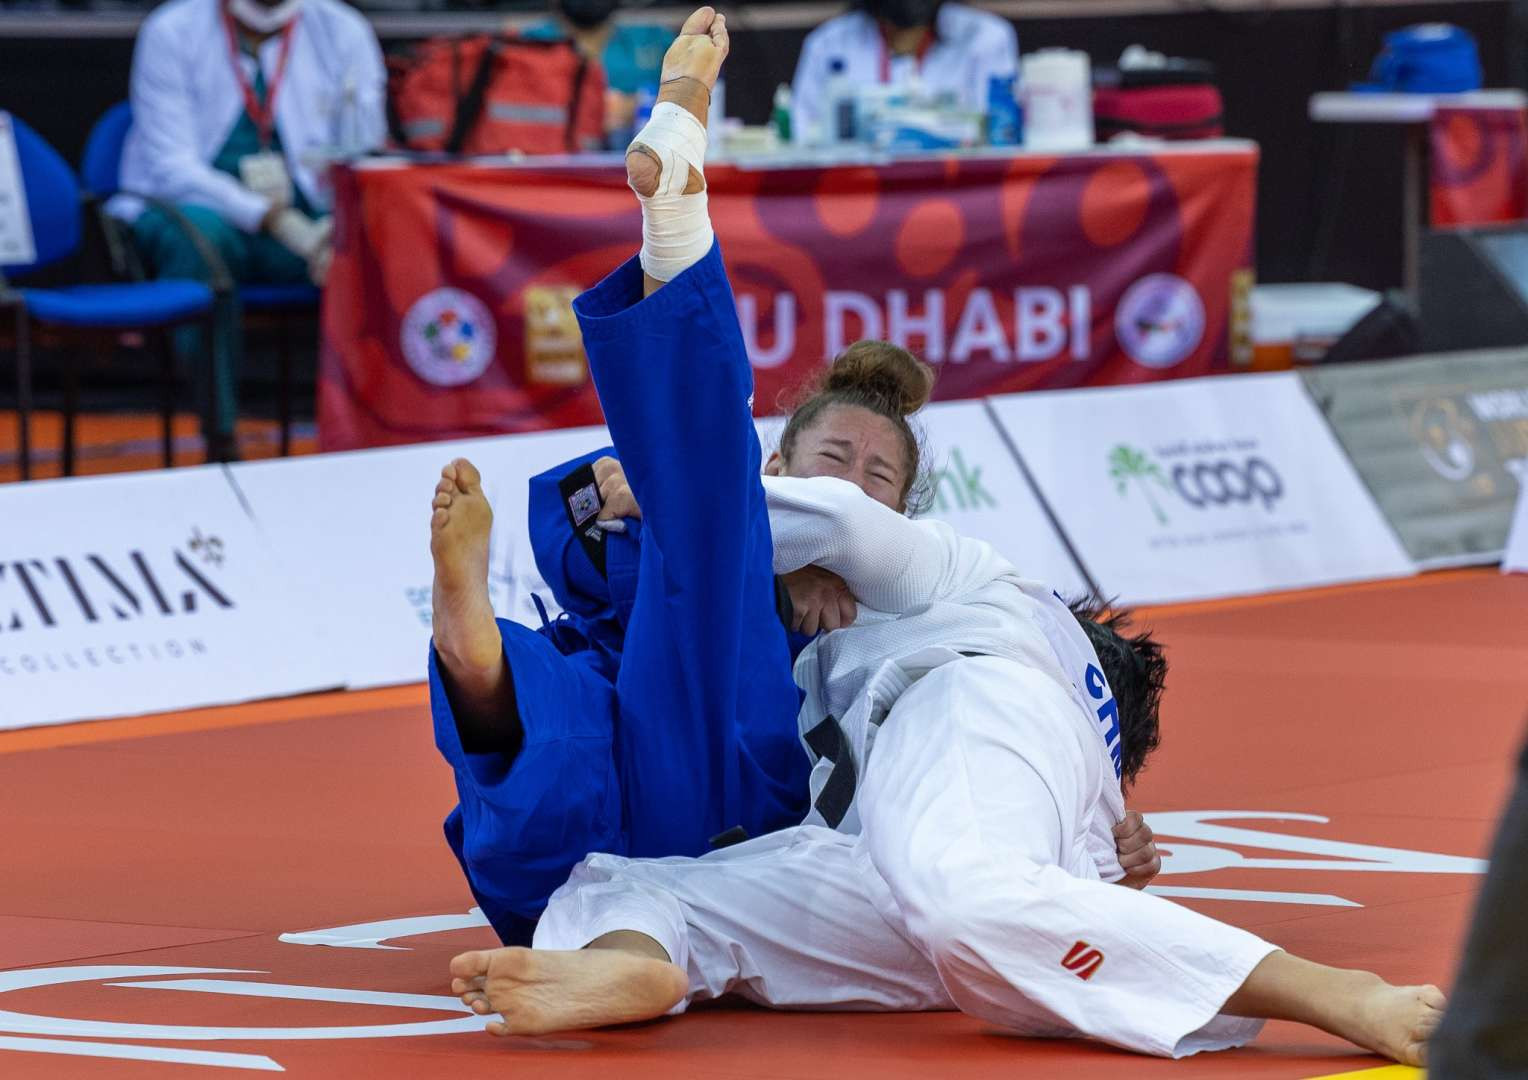 Ma Zhenzhao of China, in white, won the women's under-78kg category at the Abu Dhabi Grand Slam ©IJF